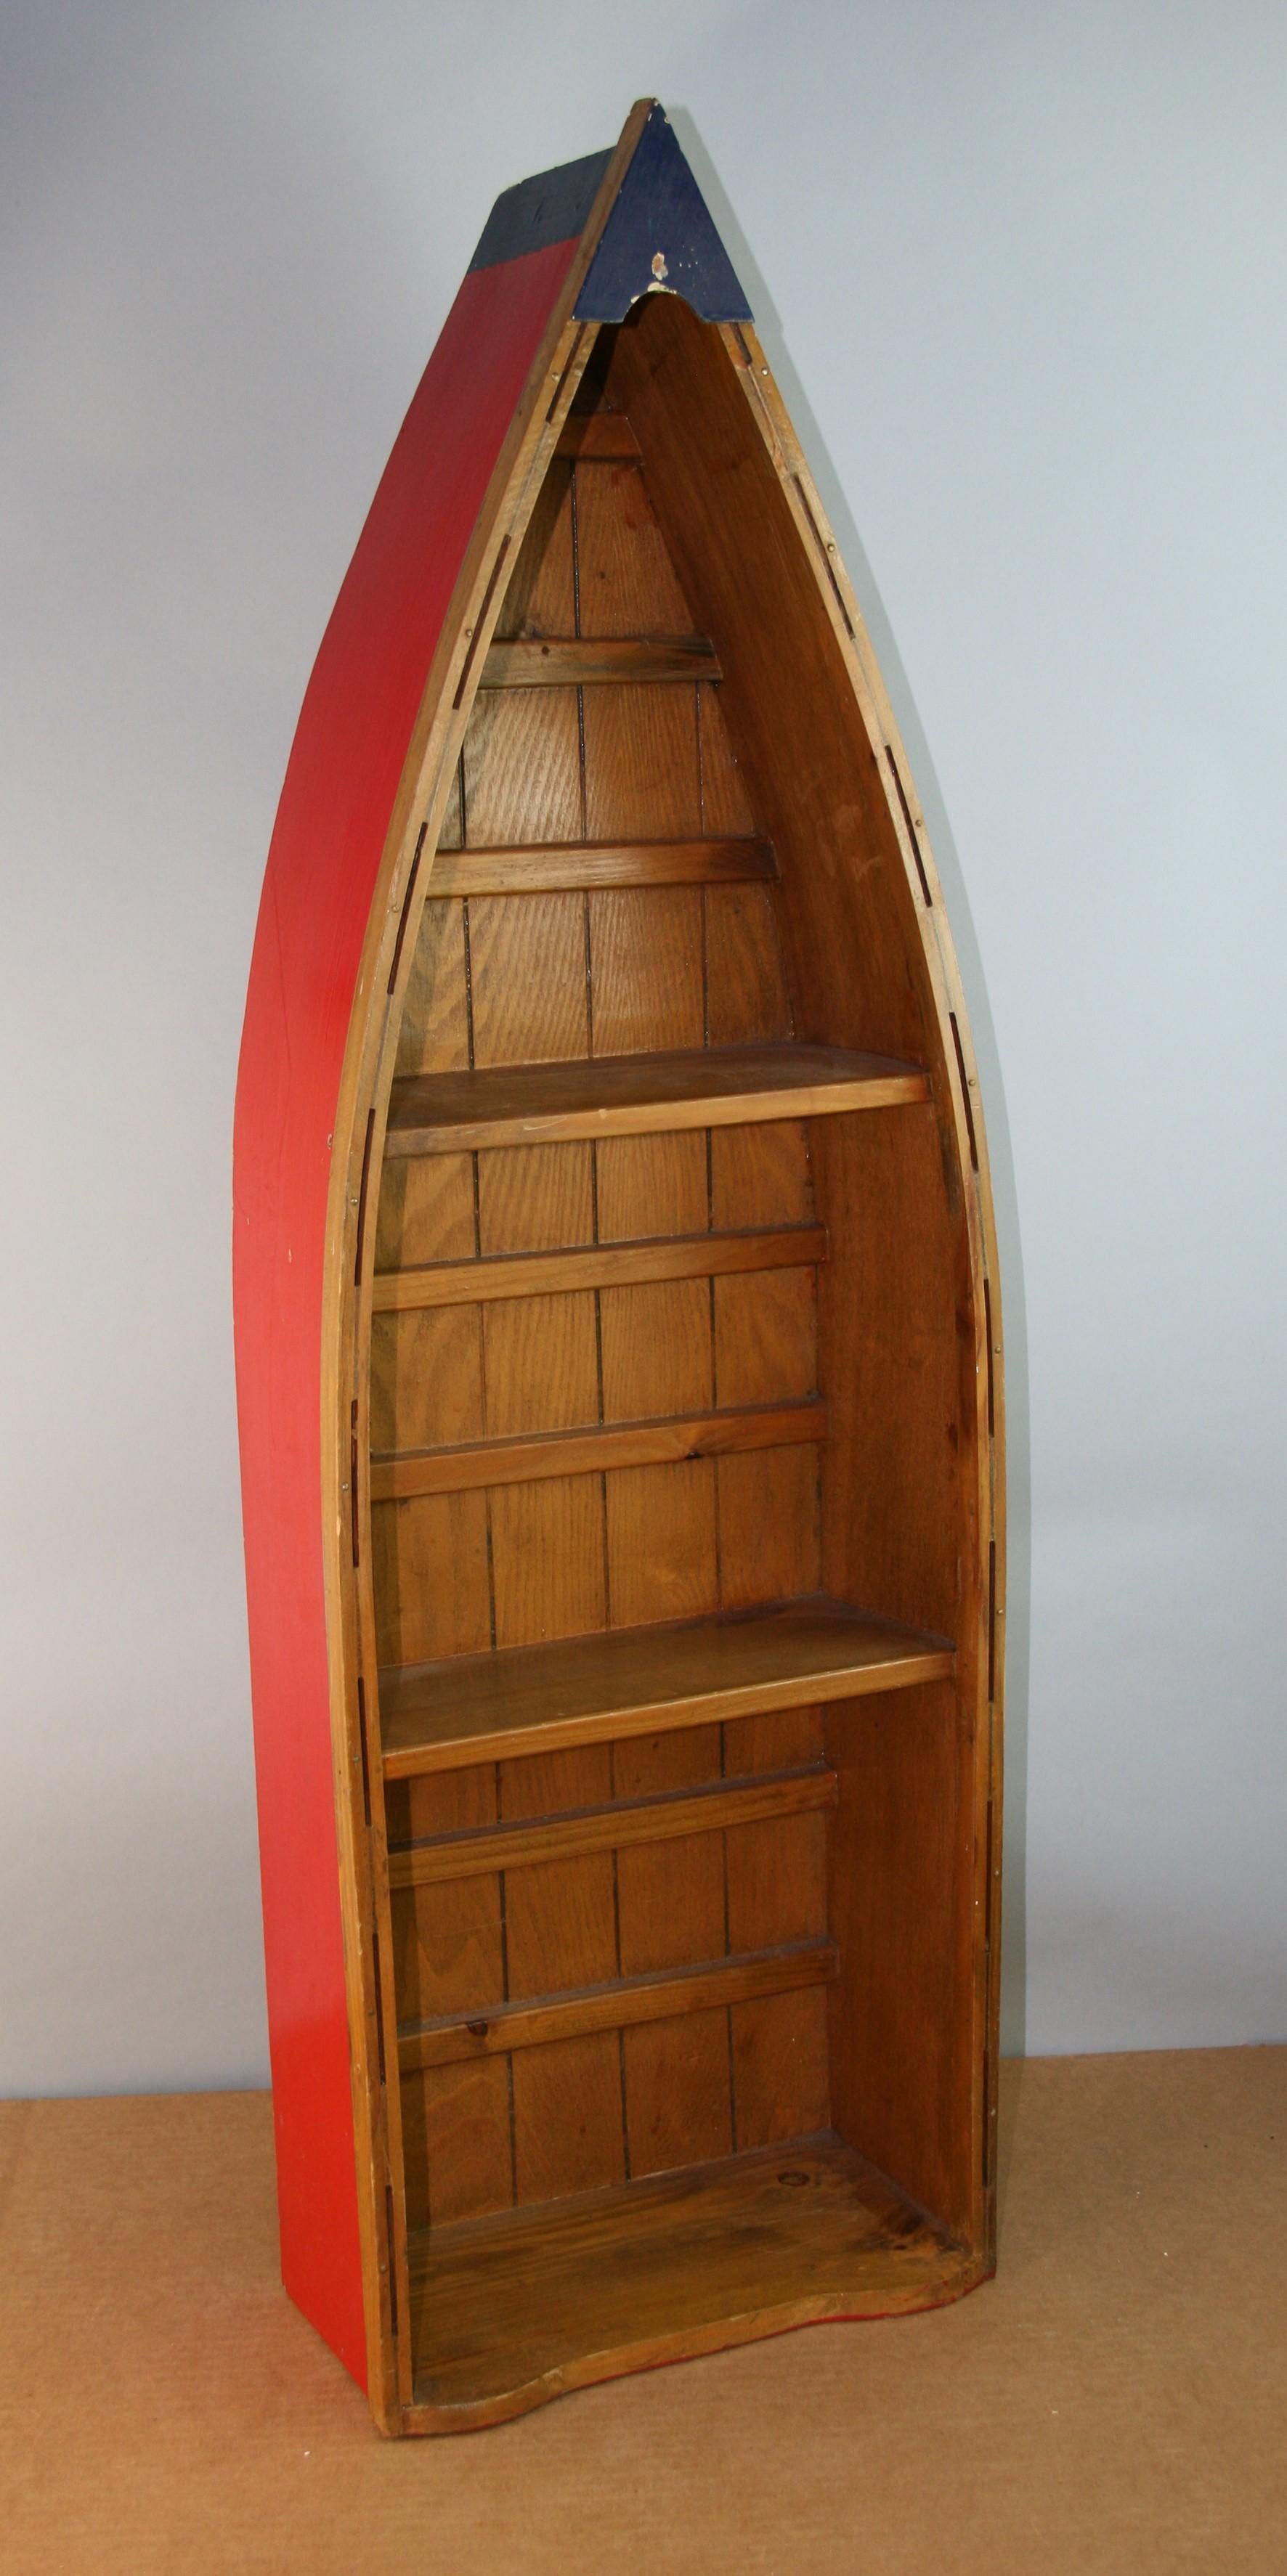 Hand made boat made into wall shelve /bookcase
shelf size 5 x 10